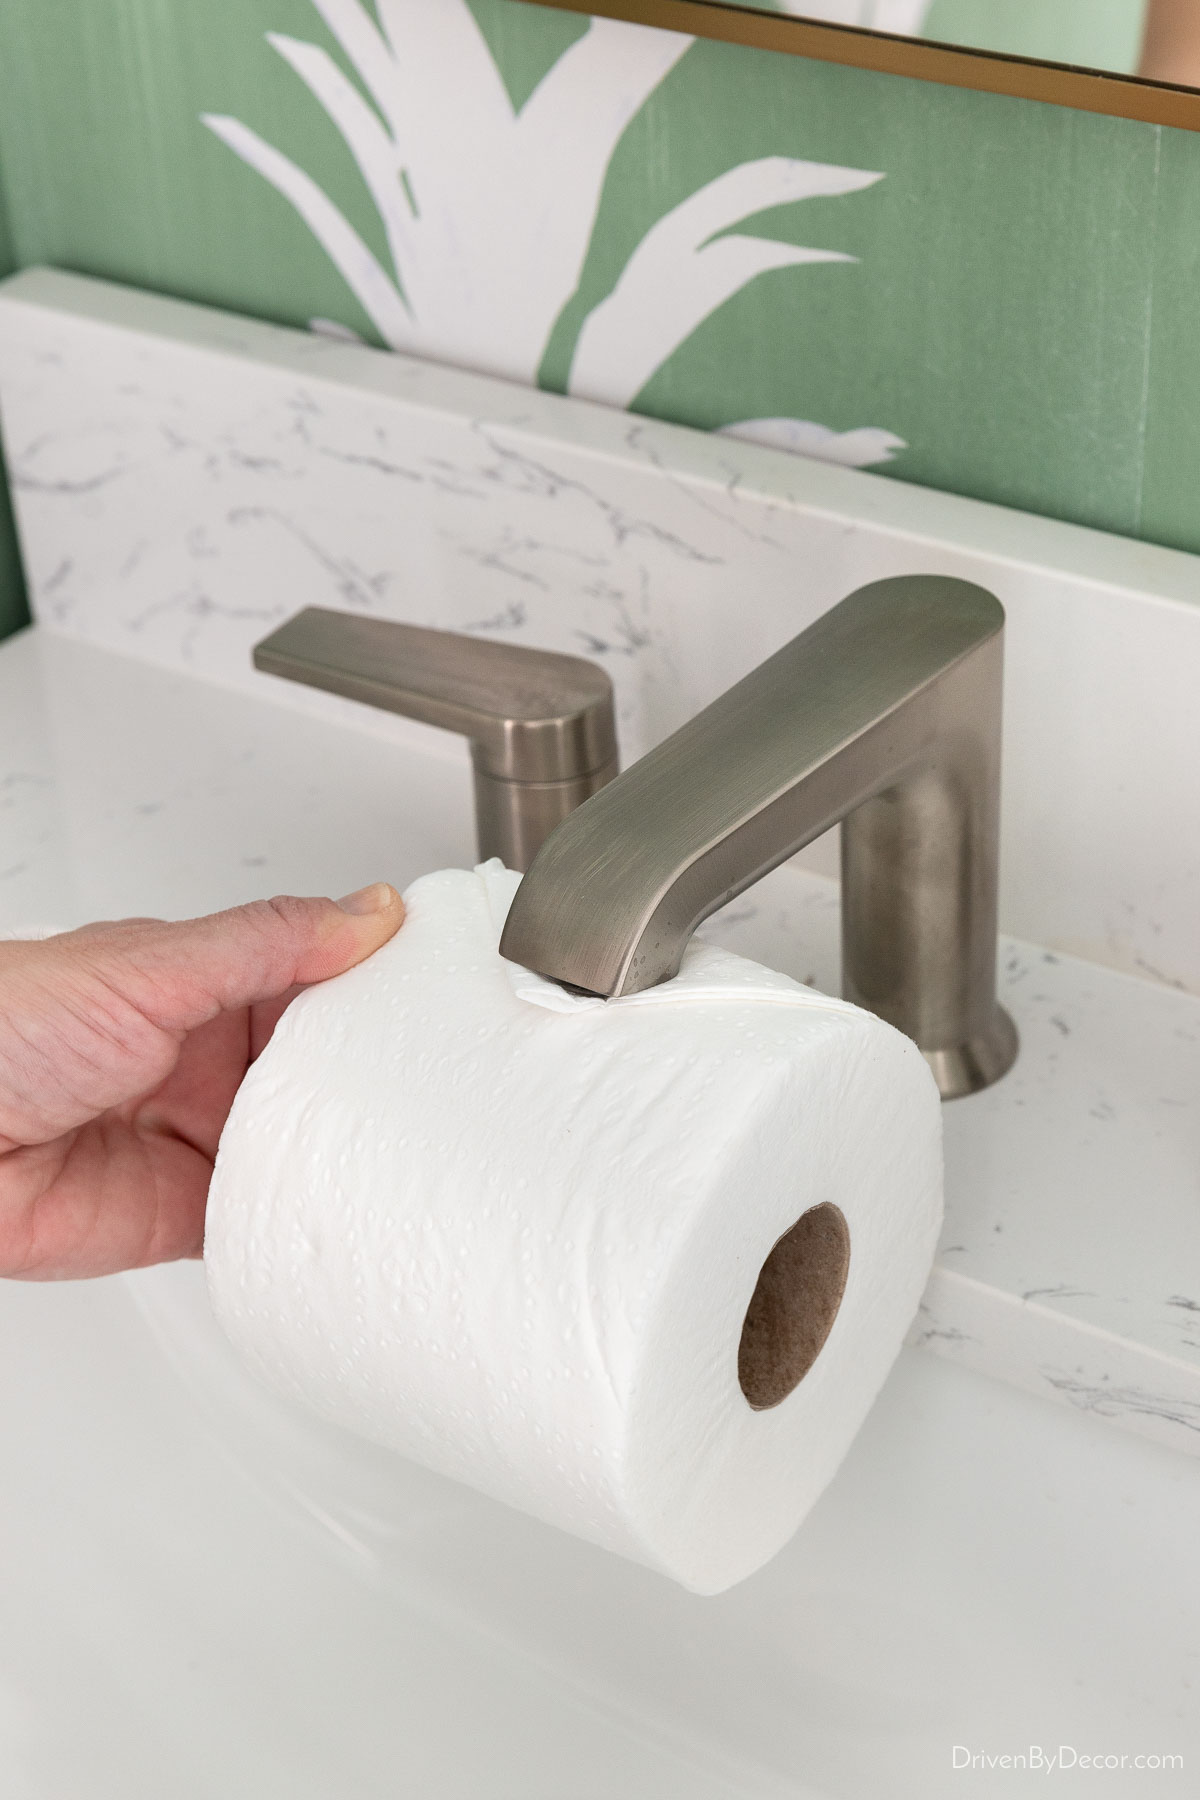 Sealing the end of the toilet paper roll with a faucet